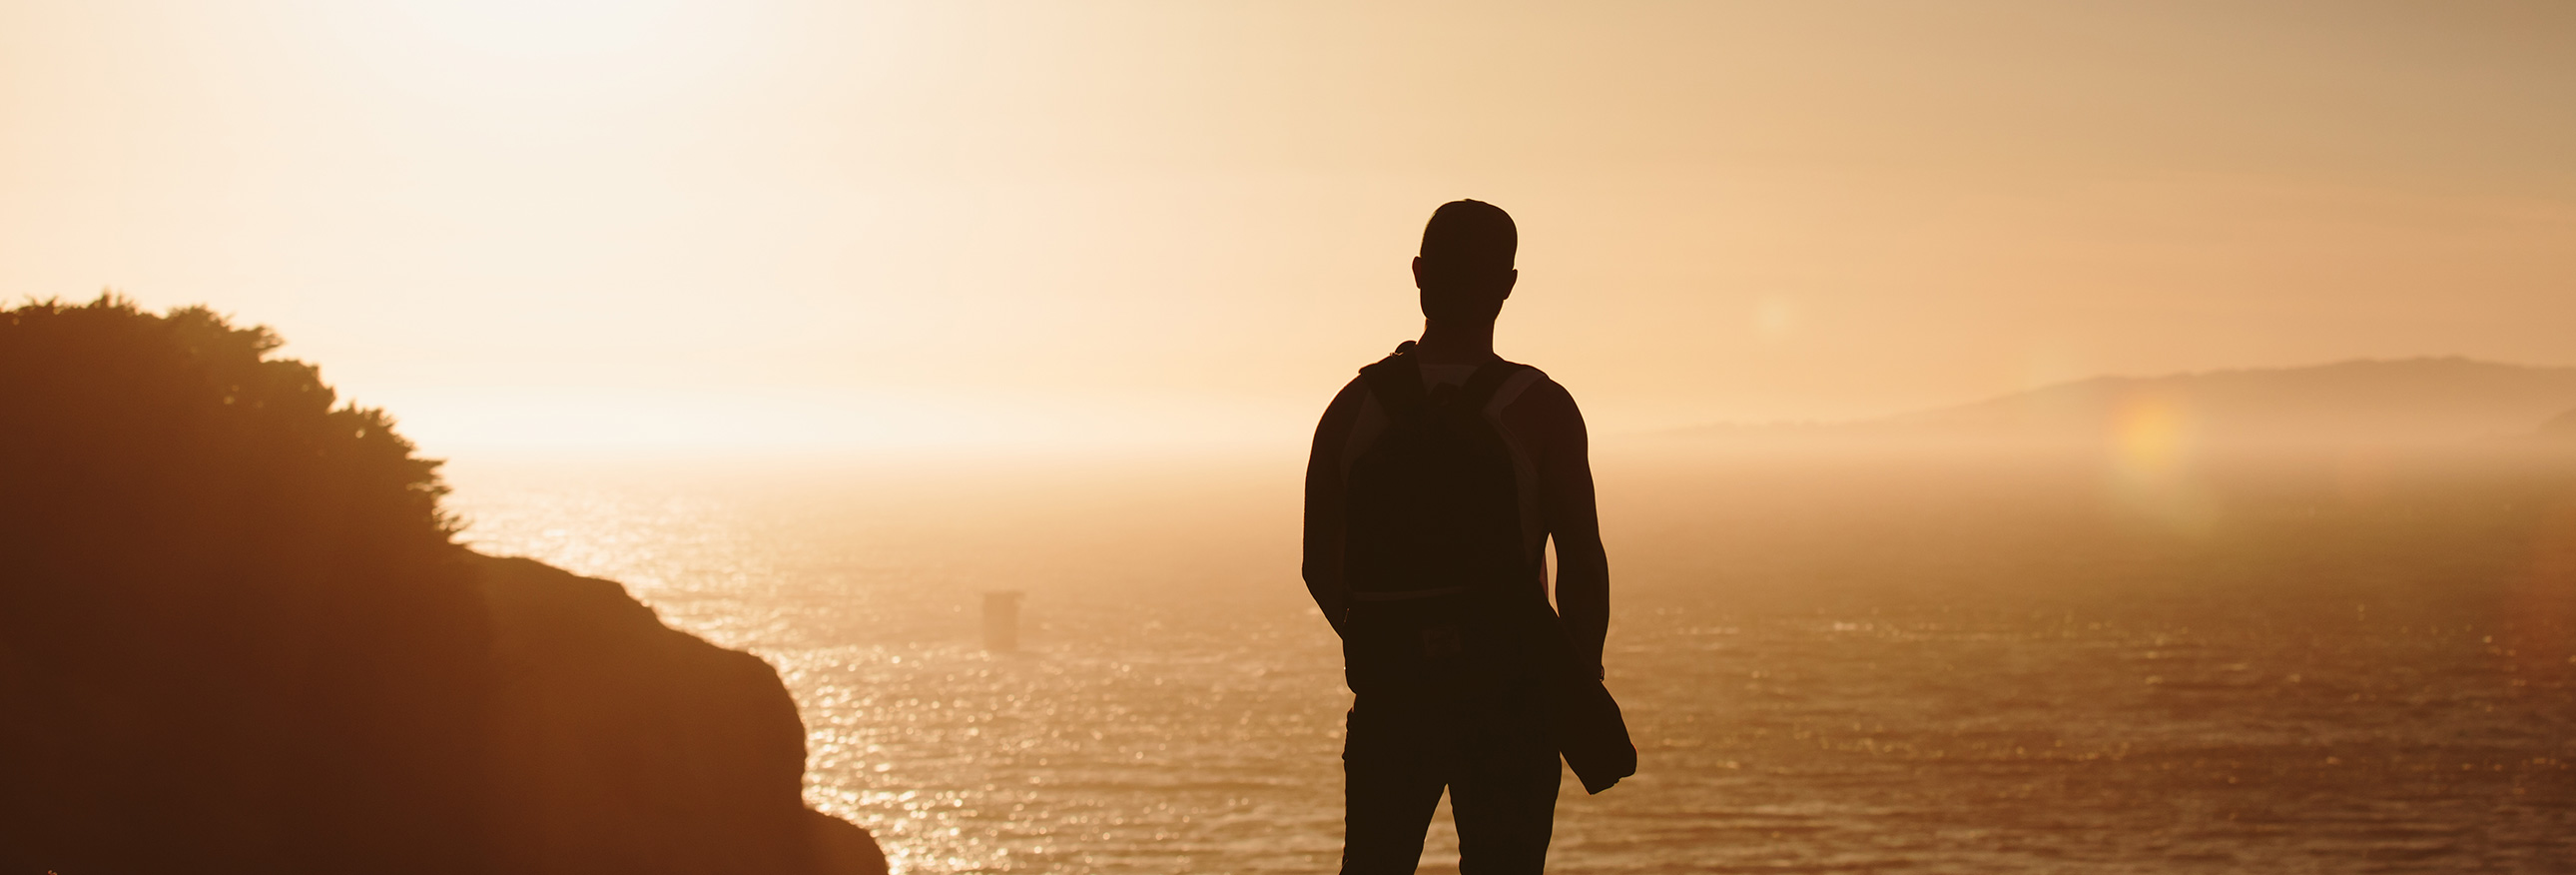 silhouette of a man overlooking water at sunset